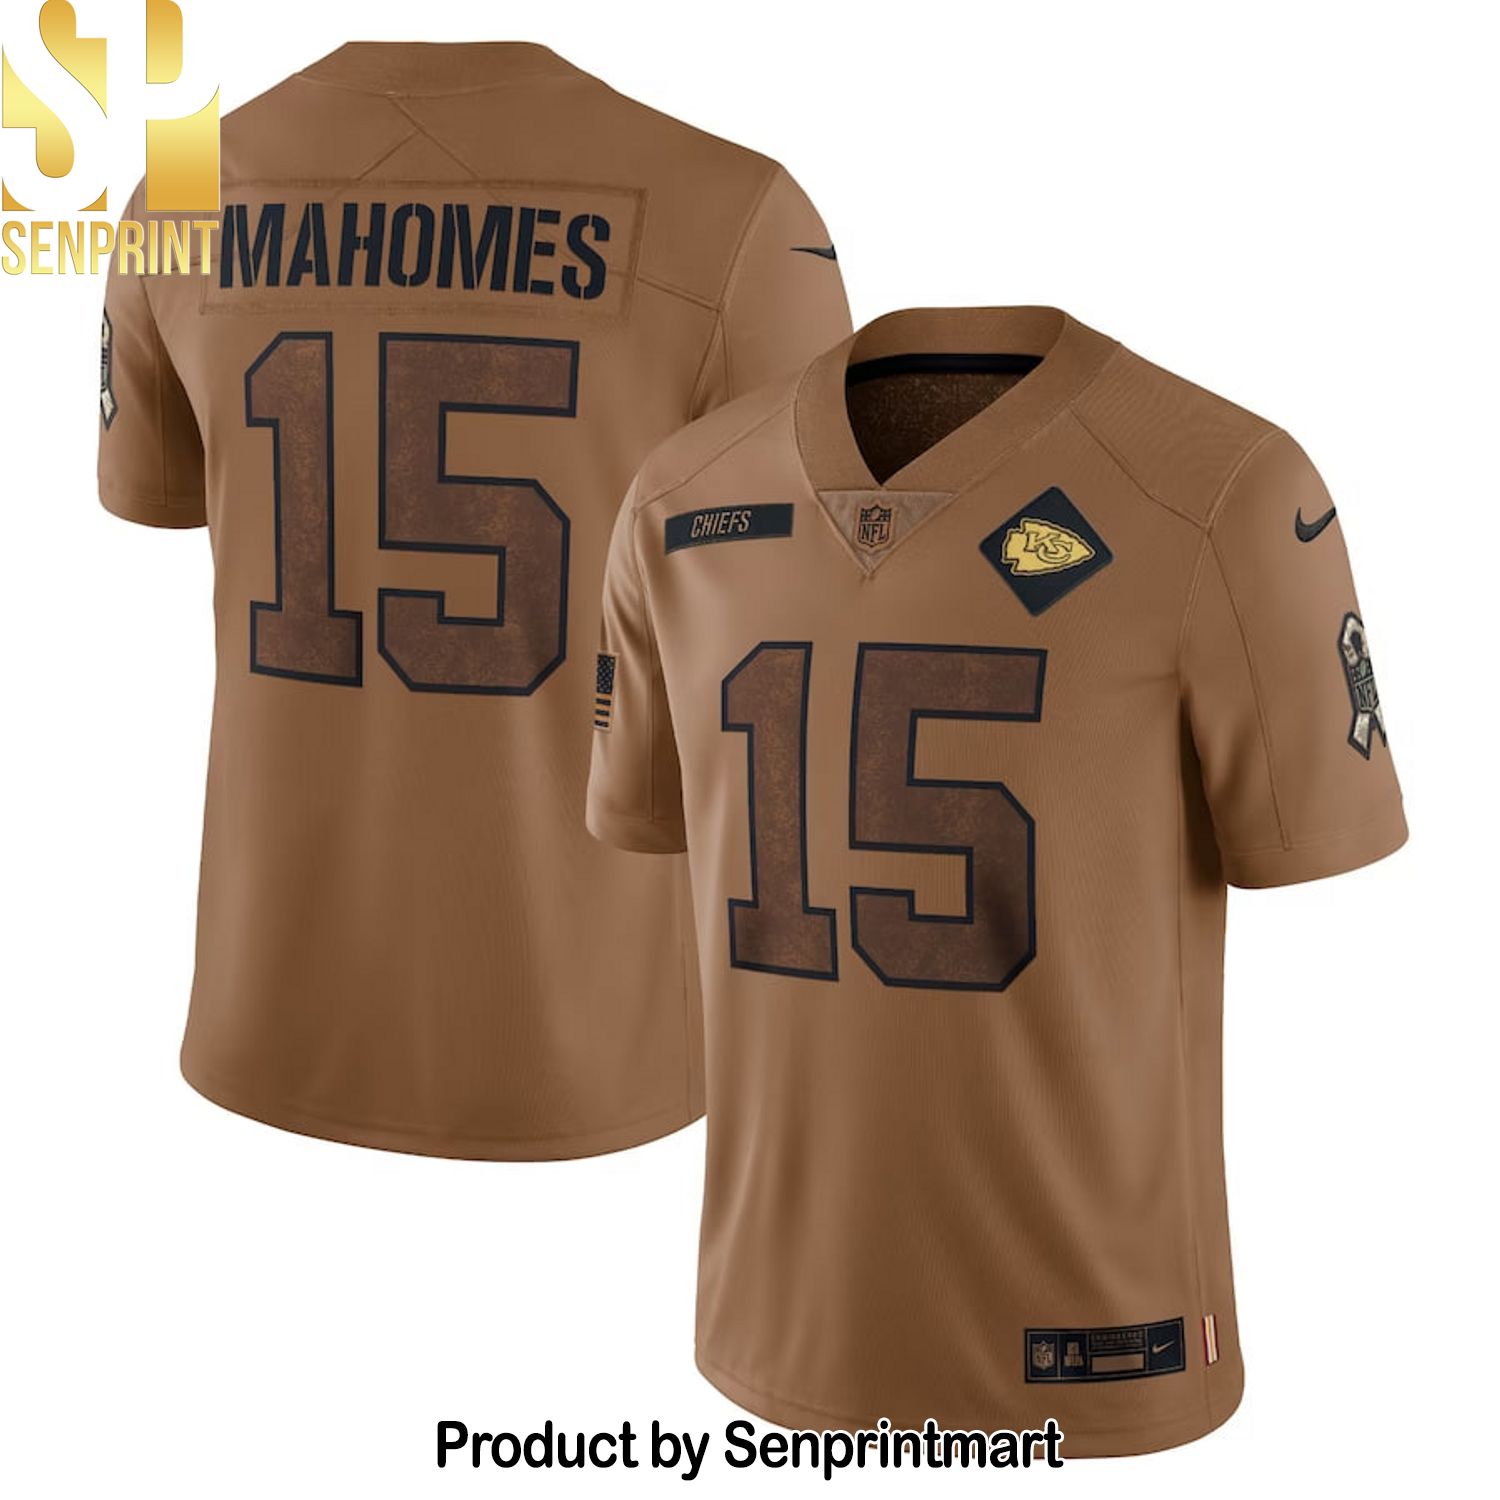 Kansas City Chiefs 2023 Salute To Service Custom Name And Number Jersey